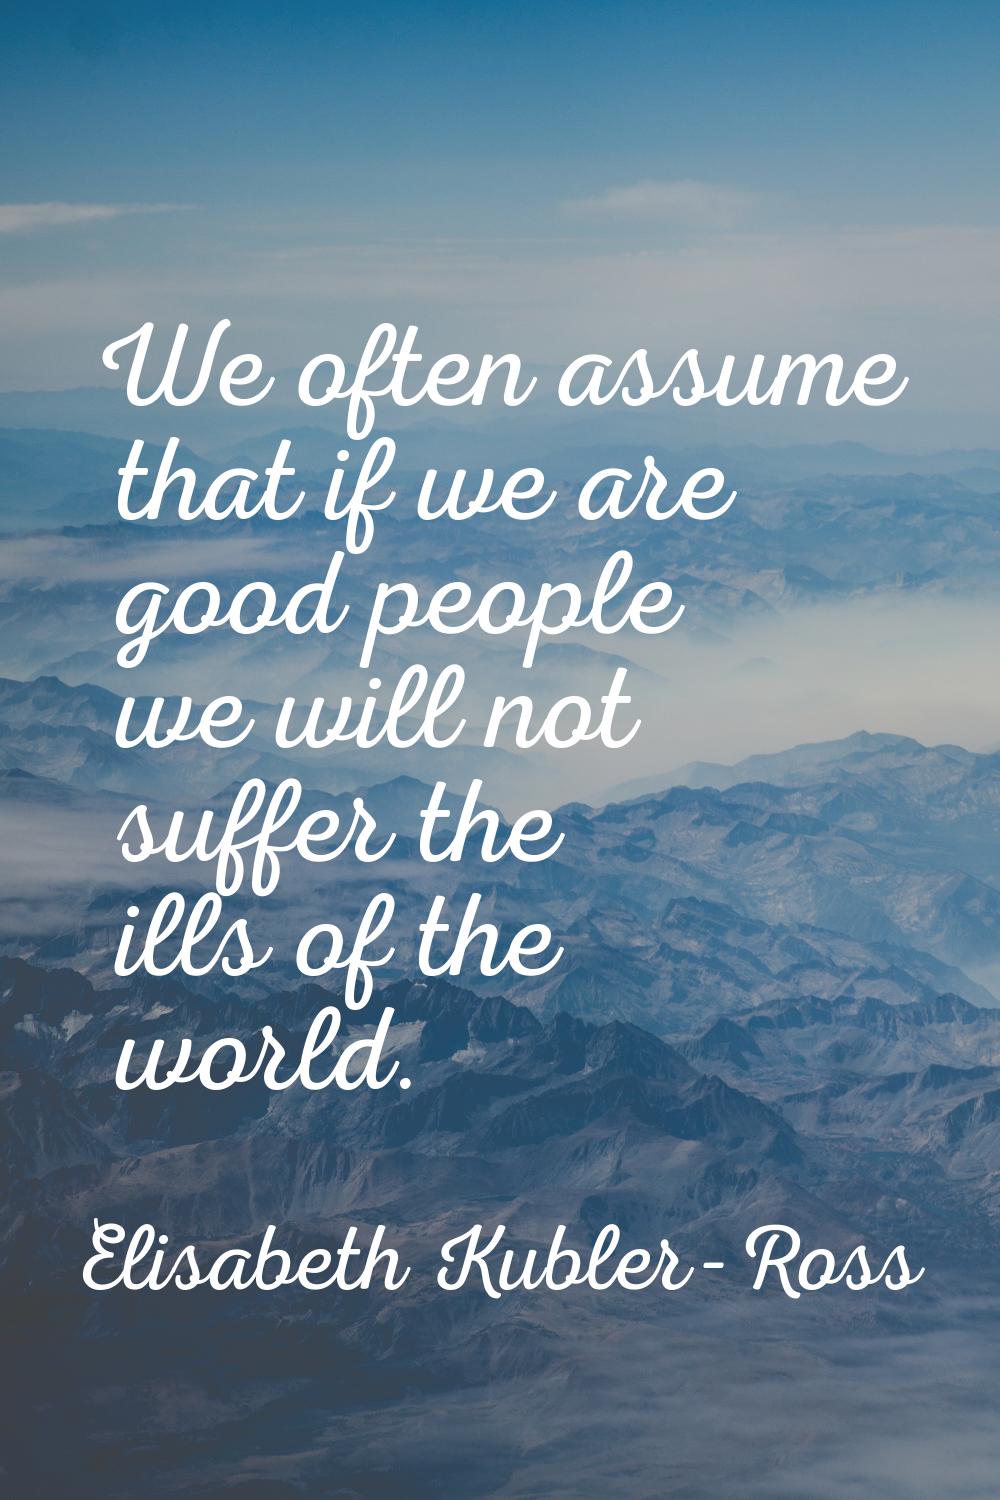 We often assume that if we are good people we will not suffer the ills of the world.